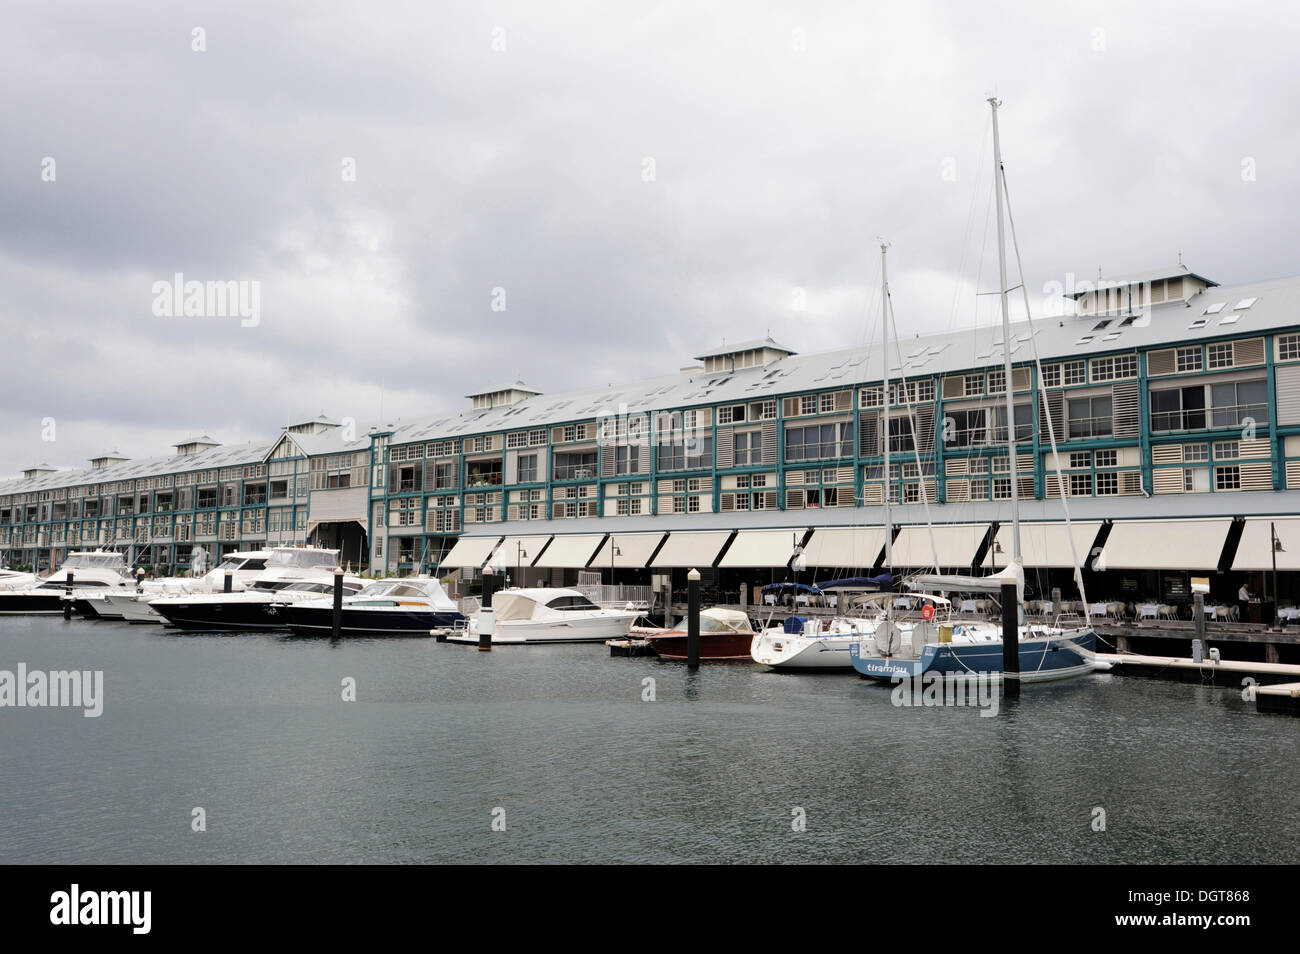 Boats in the marina at the Finger Wharf, Woolloomooloo Bay, Sydney Harbour, Sydney, New South Wales, NSW, Australia Stock Photo